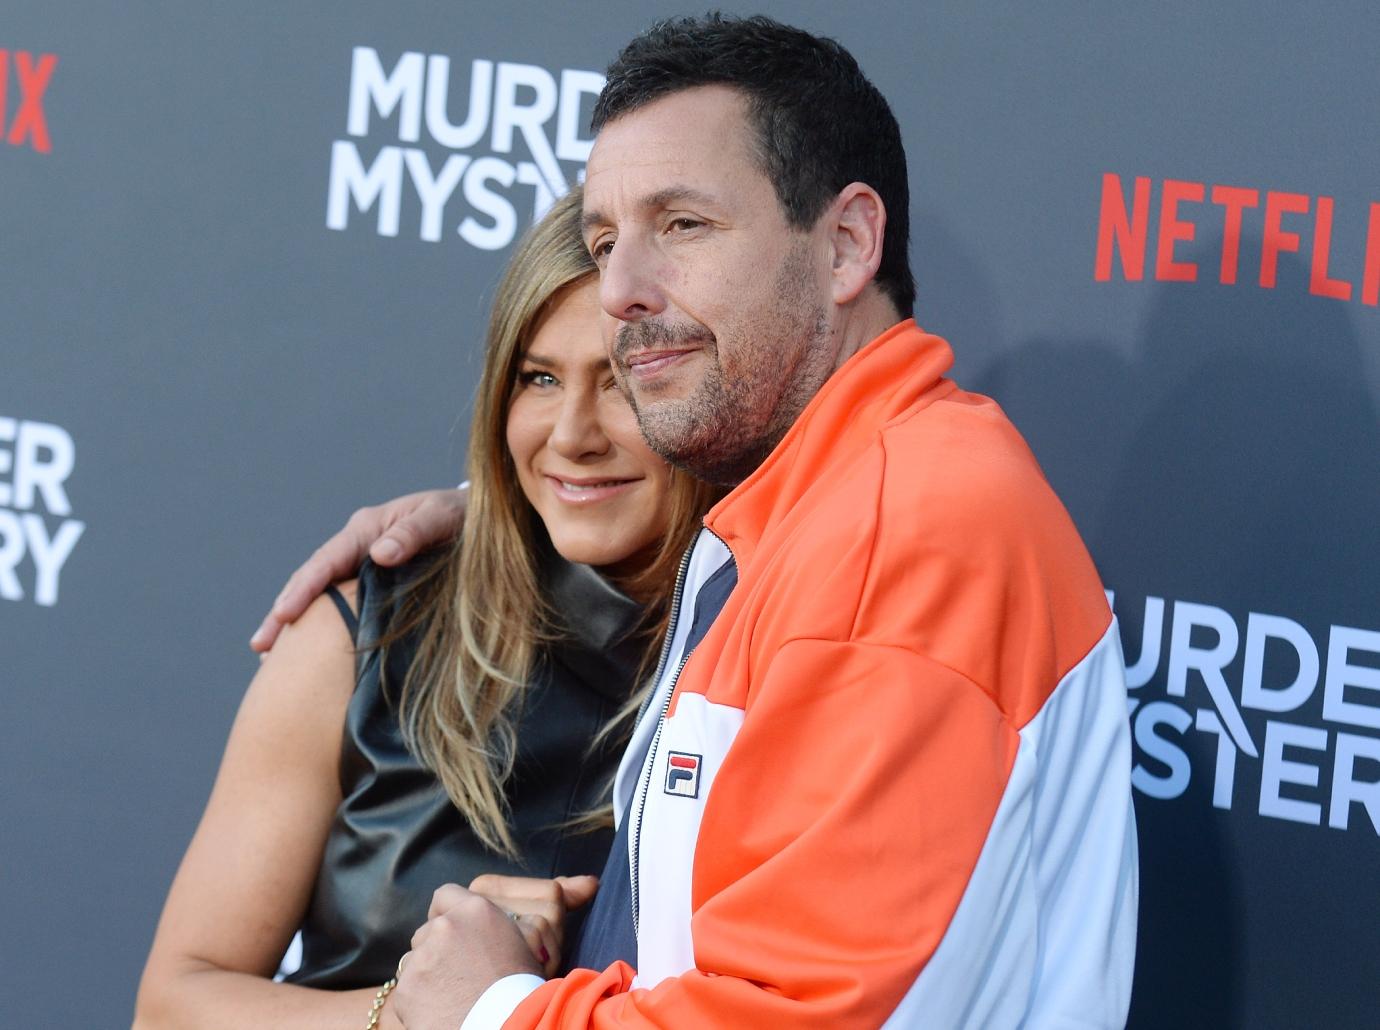 Review: Jennifer Aniston and Adam Sandler win again with snappy 'Murder  Mystery 2' - Los Angeles Times